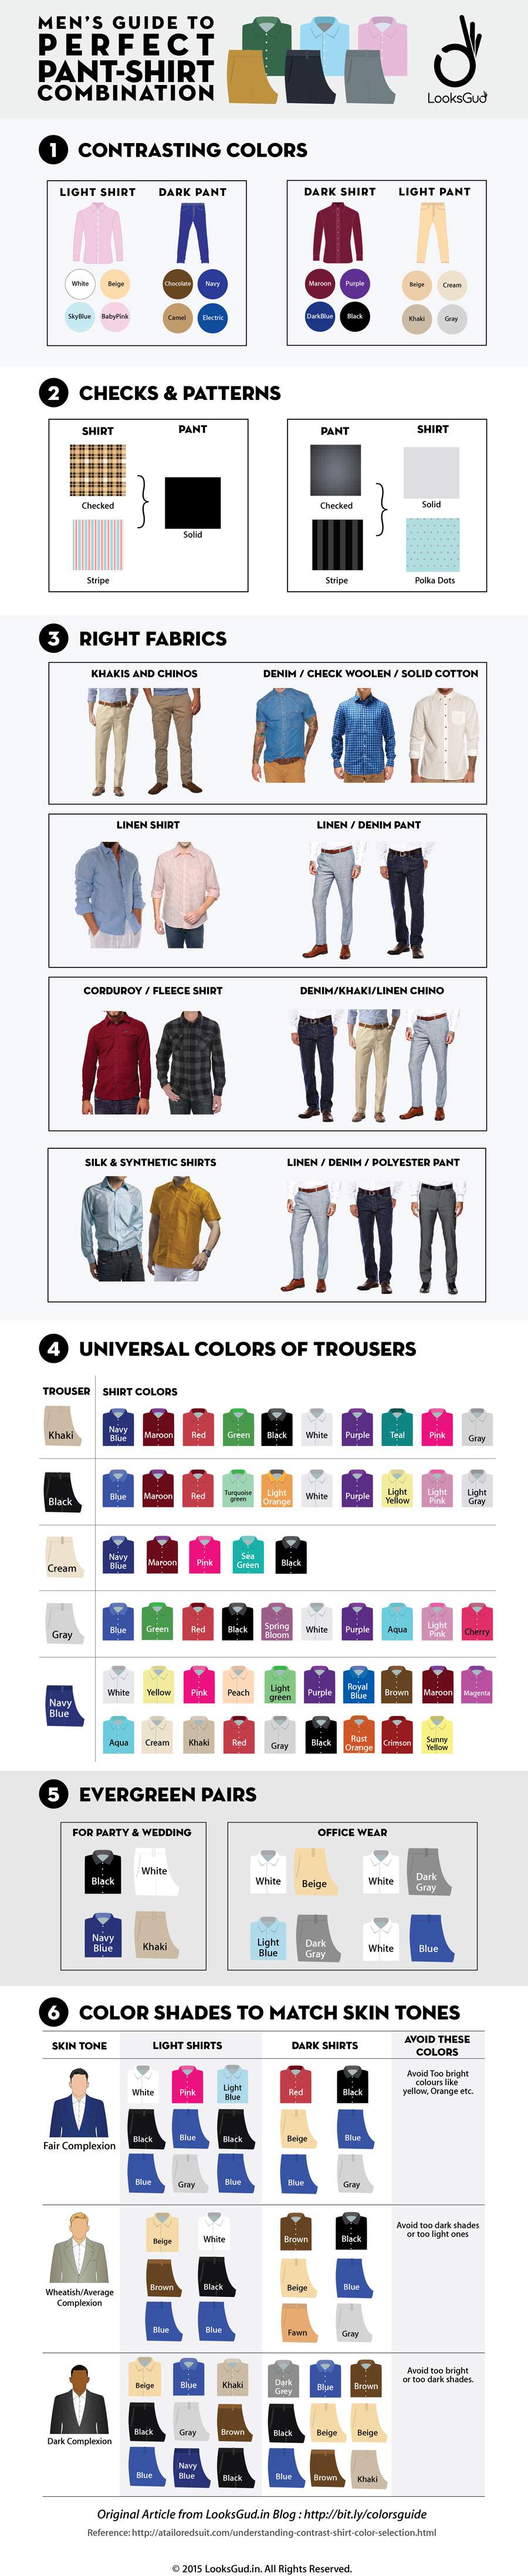 Matching Guide for Men's Formal